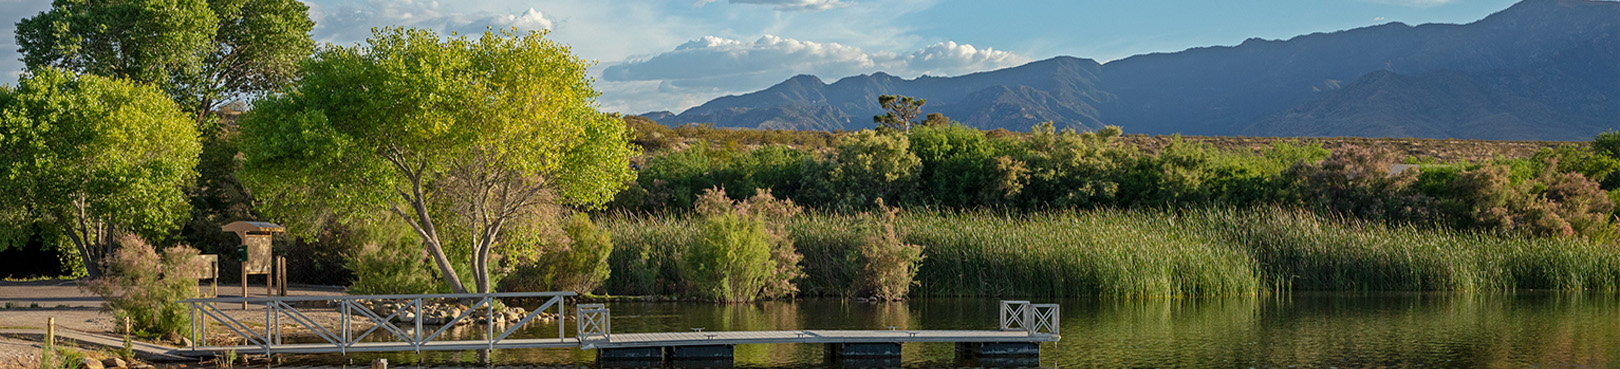 A metal fishing/boat dock extends into Roper Lake. Bright green vegetation and the foothills of Mt. Graham are seen in the distance.